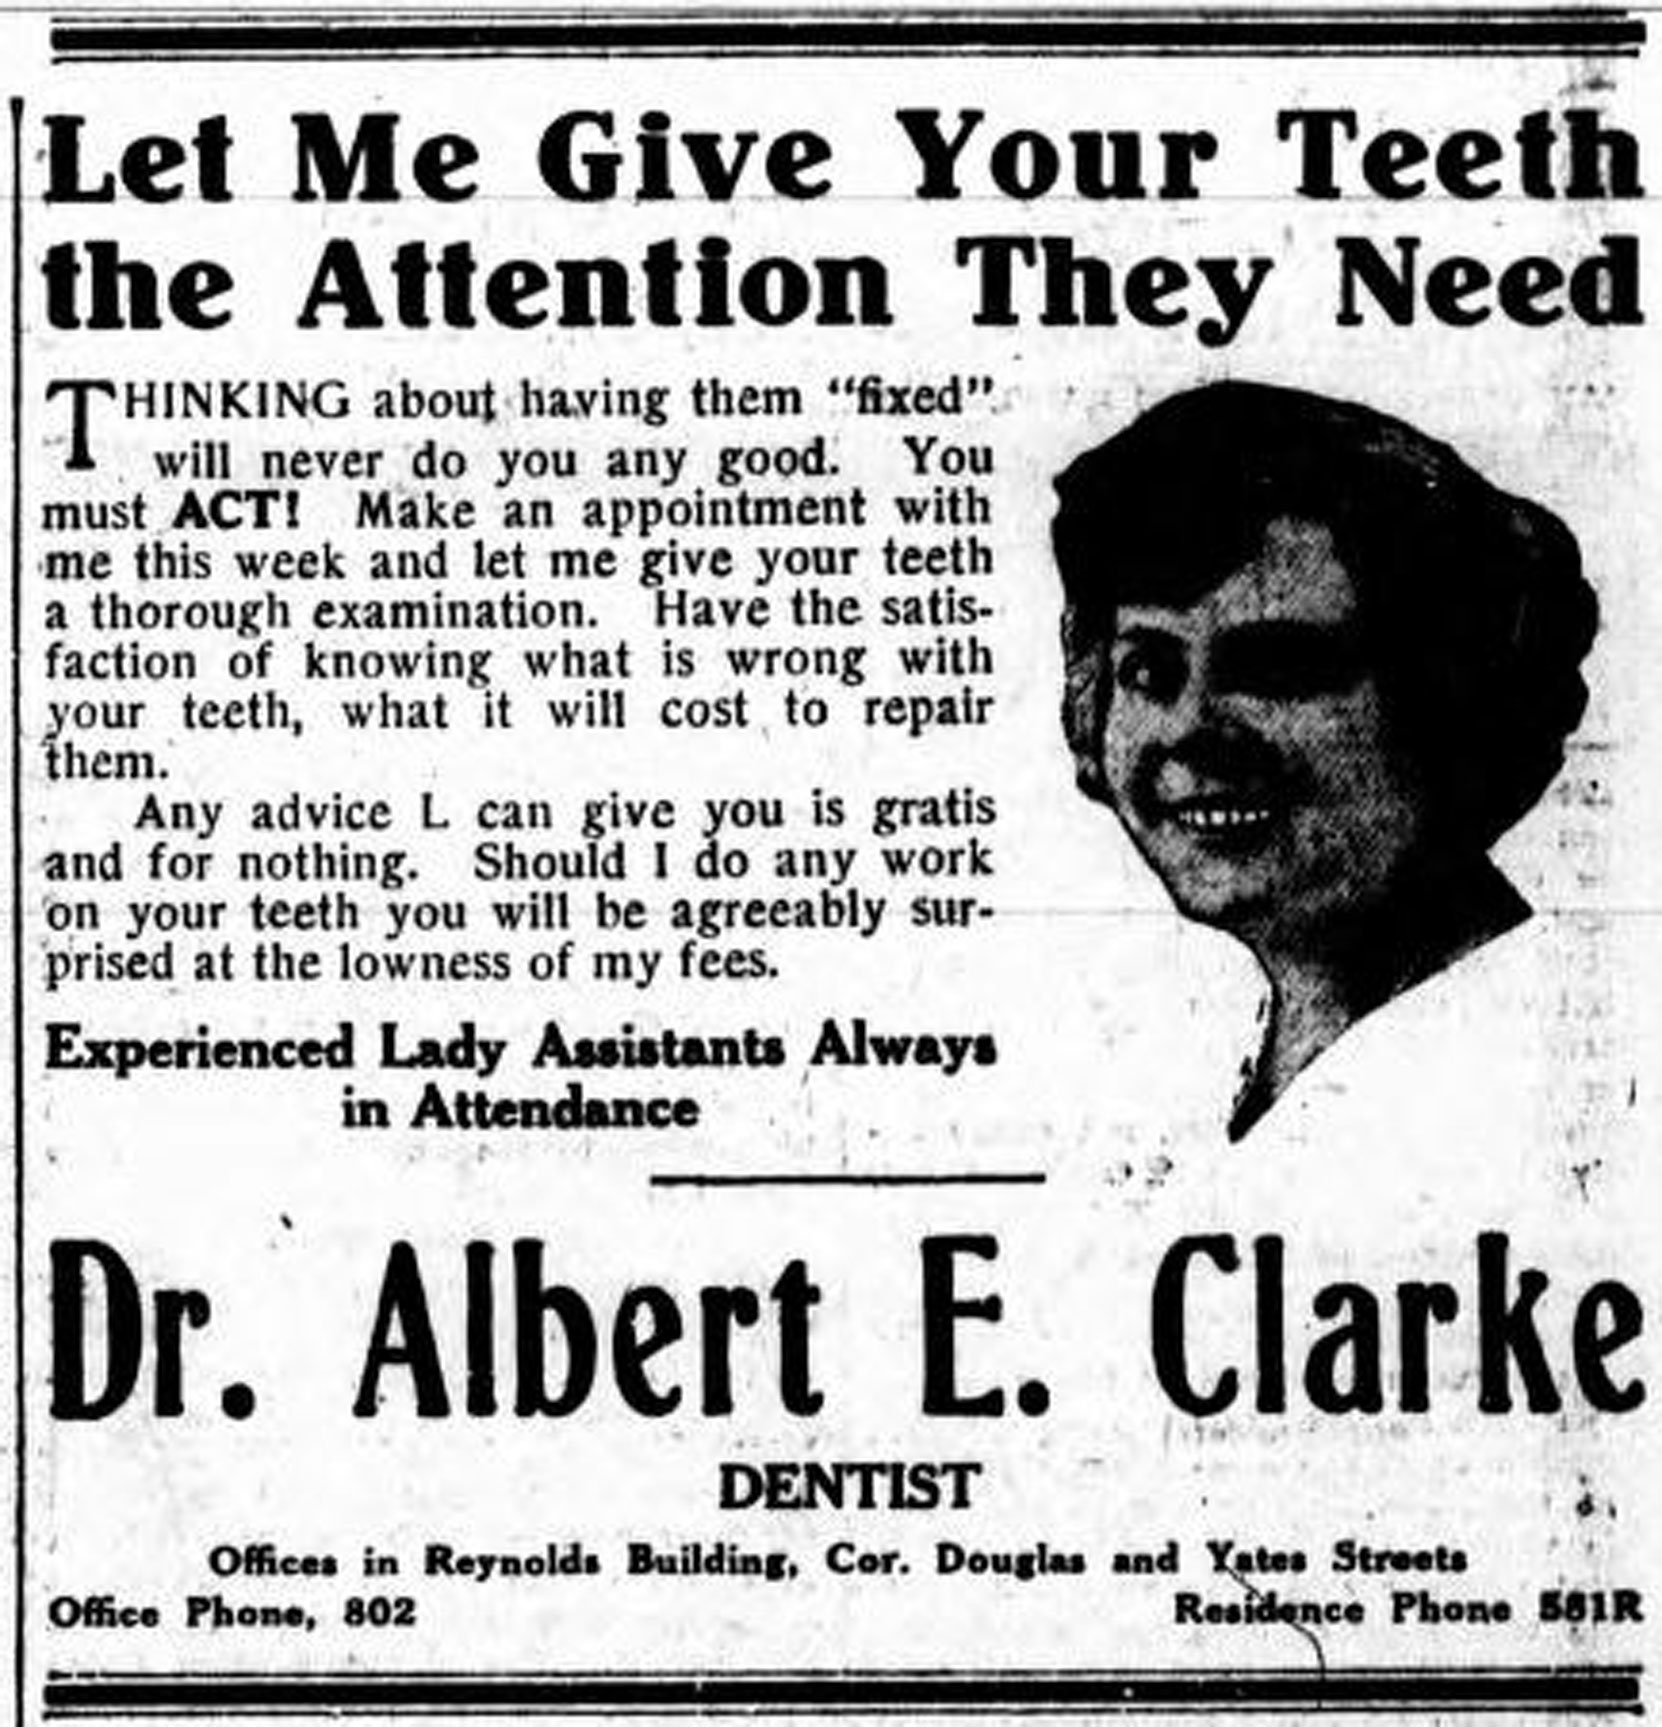 1917 advertisement for Dr. Albert E. Clarke, Dentist, located in the Reynolds Building, 1300-1306 Douglas Street (Victoria Online Sightseeing Tours collection)